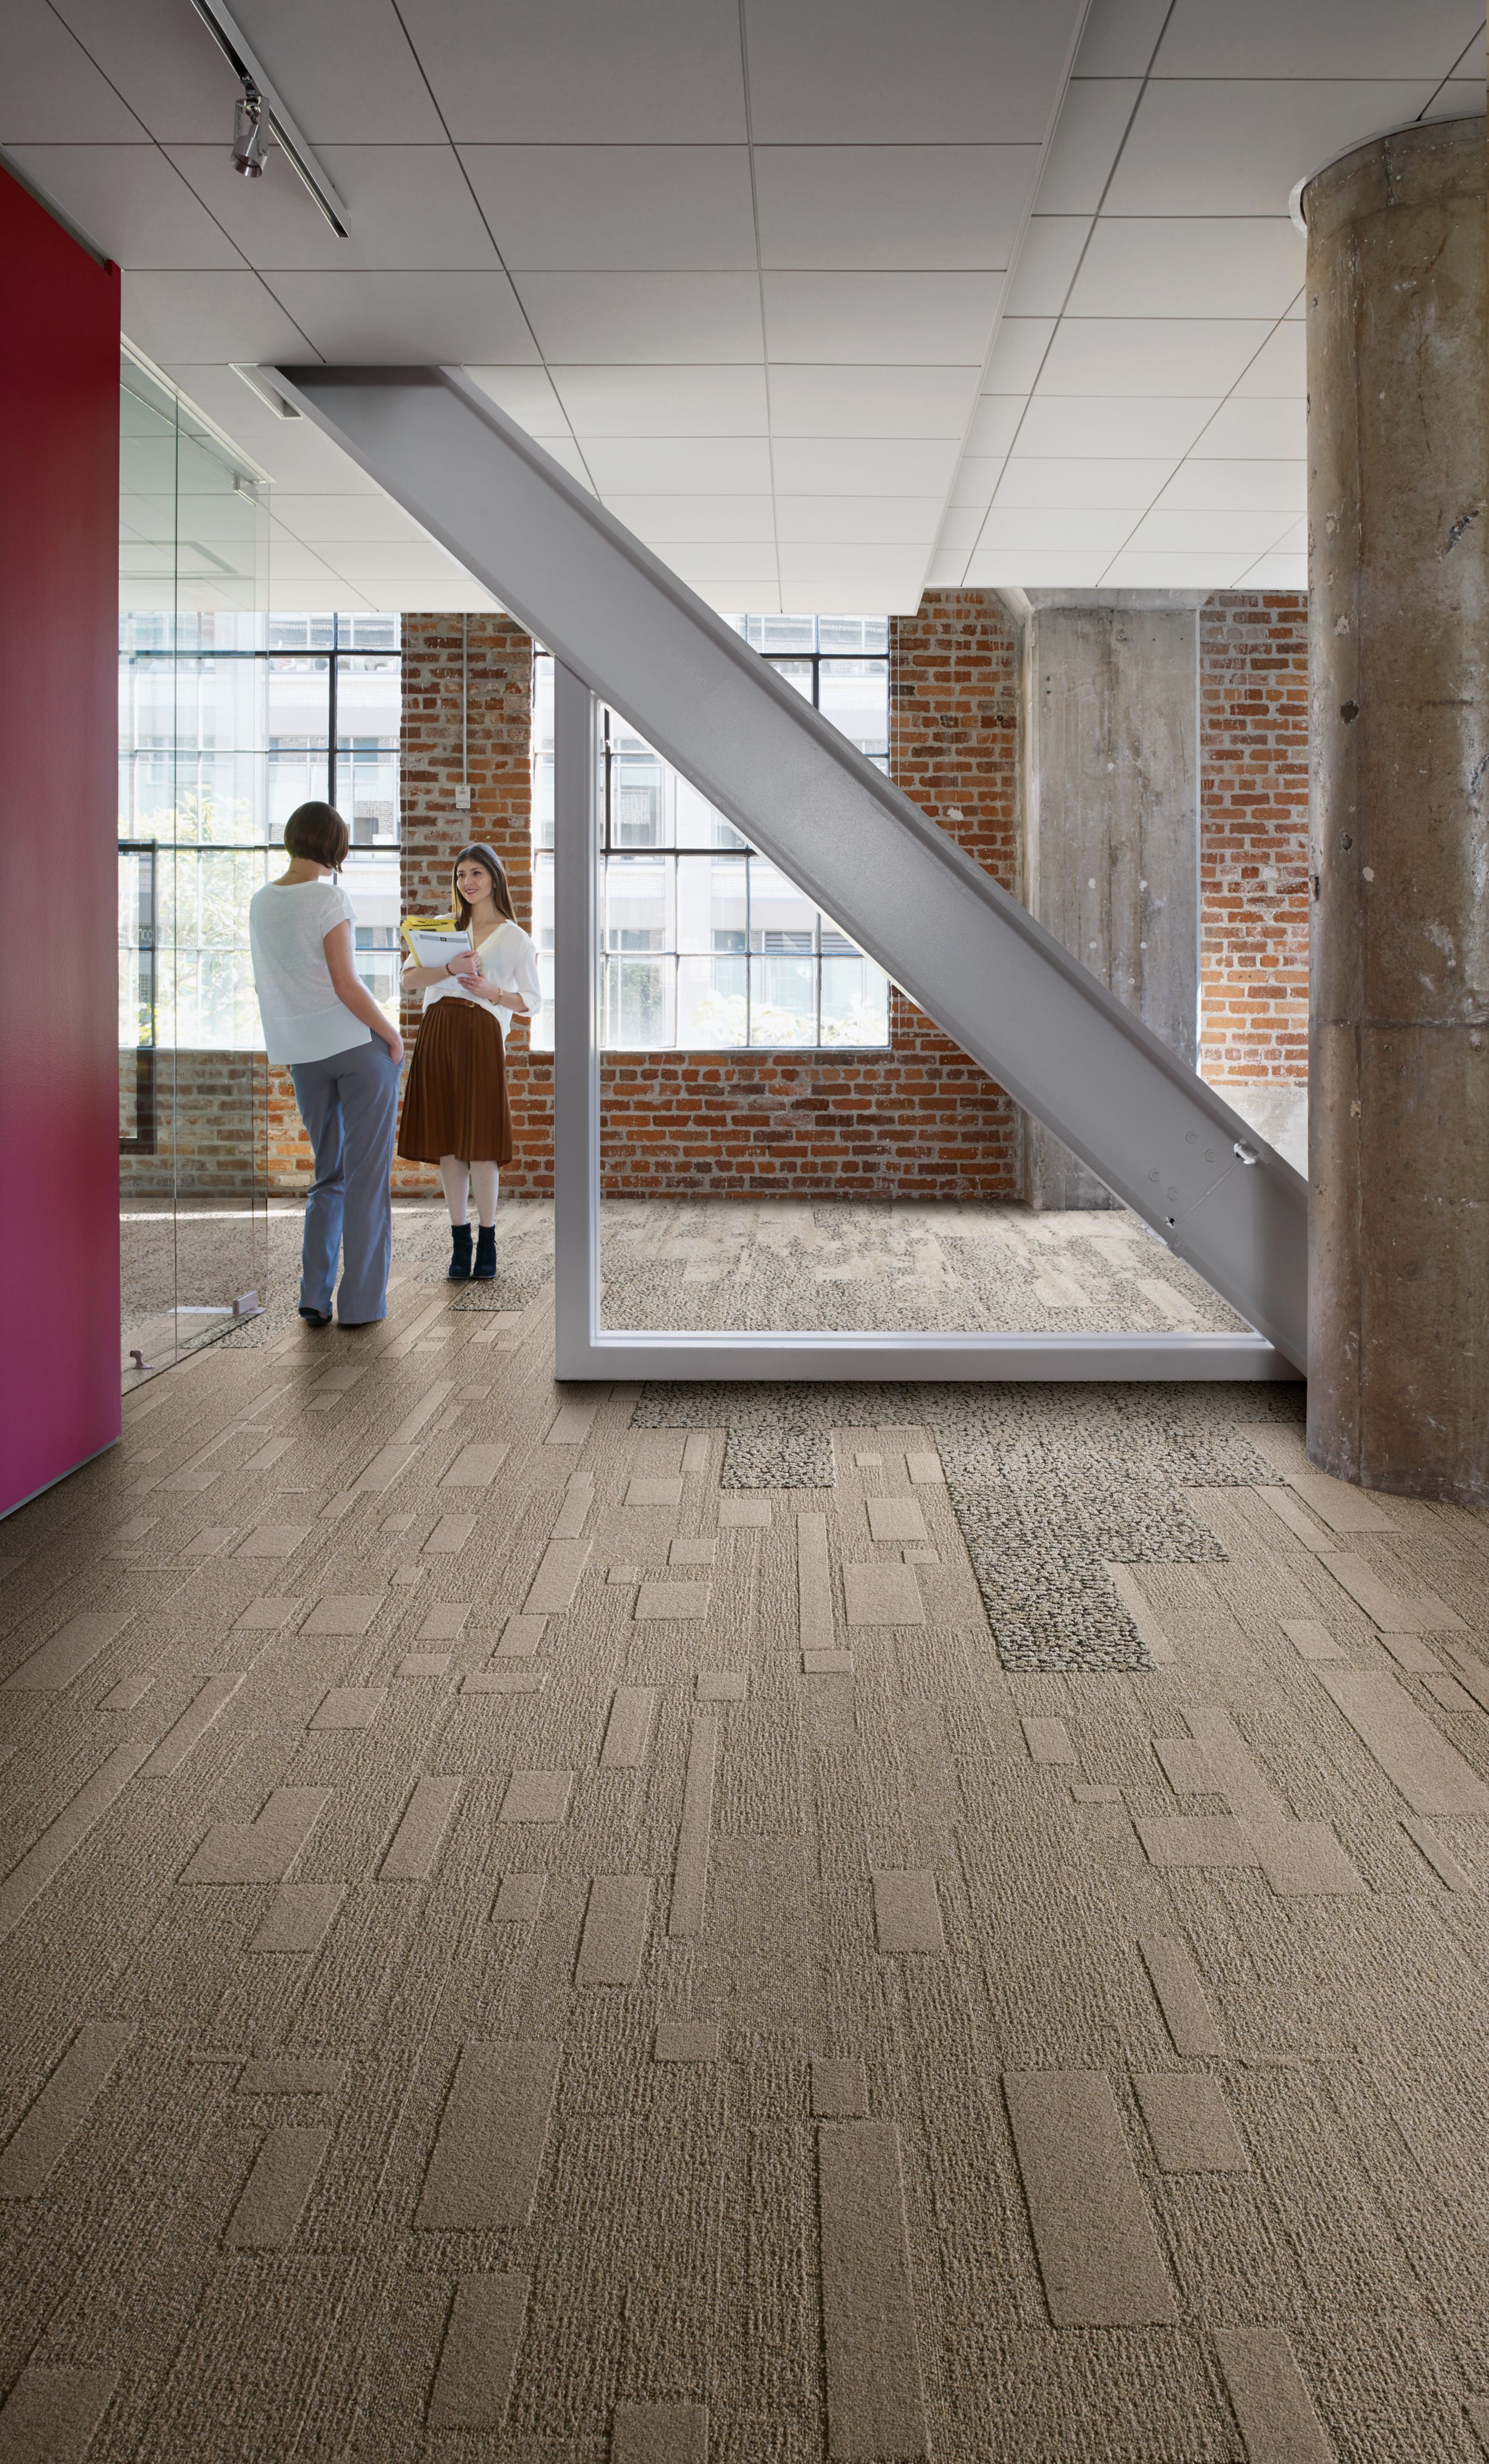 Interface EM552 plank carpet tile in with diagnal column and two women talking Bildnummer 3